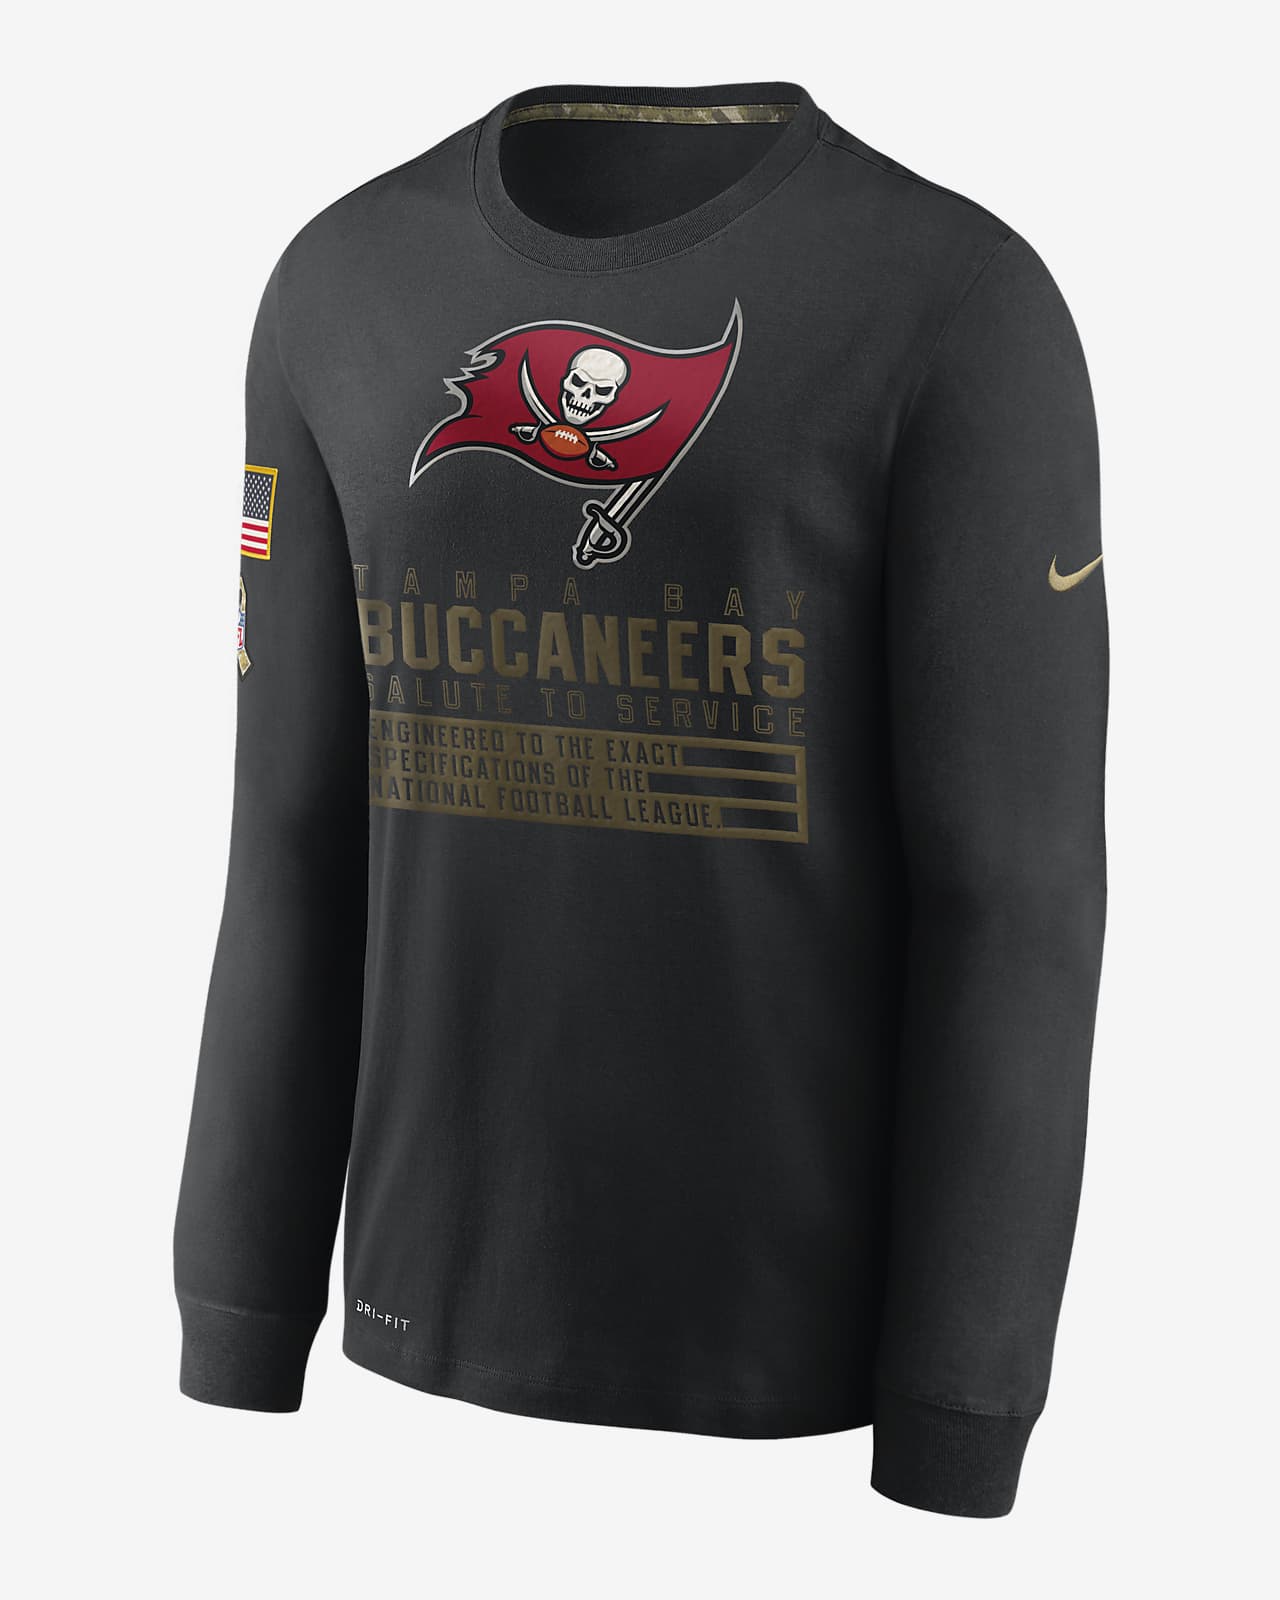 tampa bay salute to service hoodie